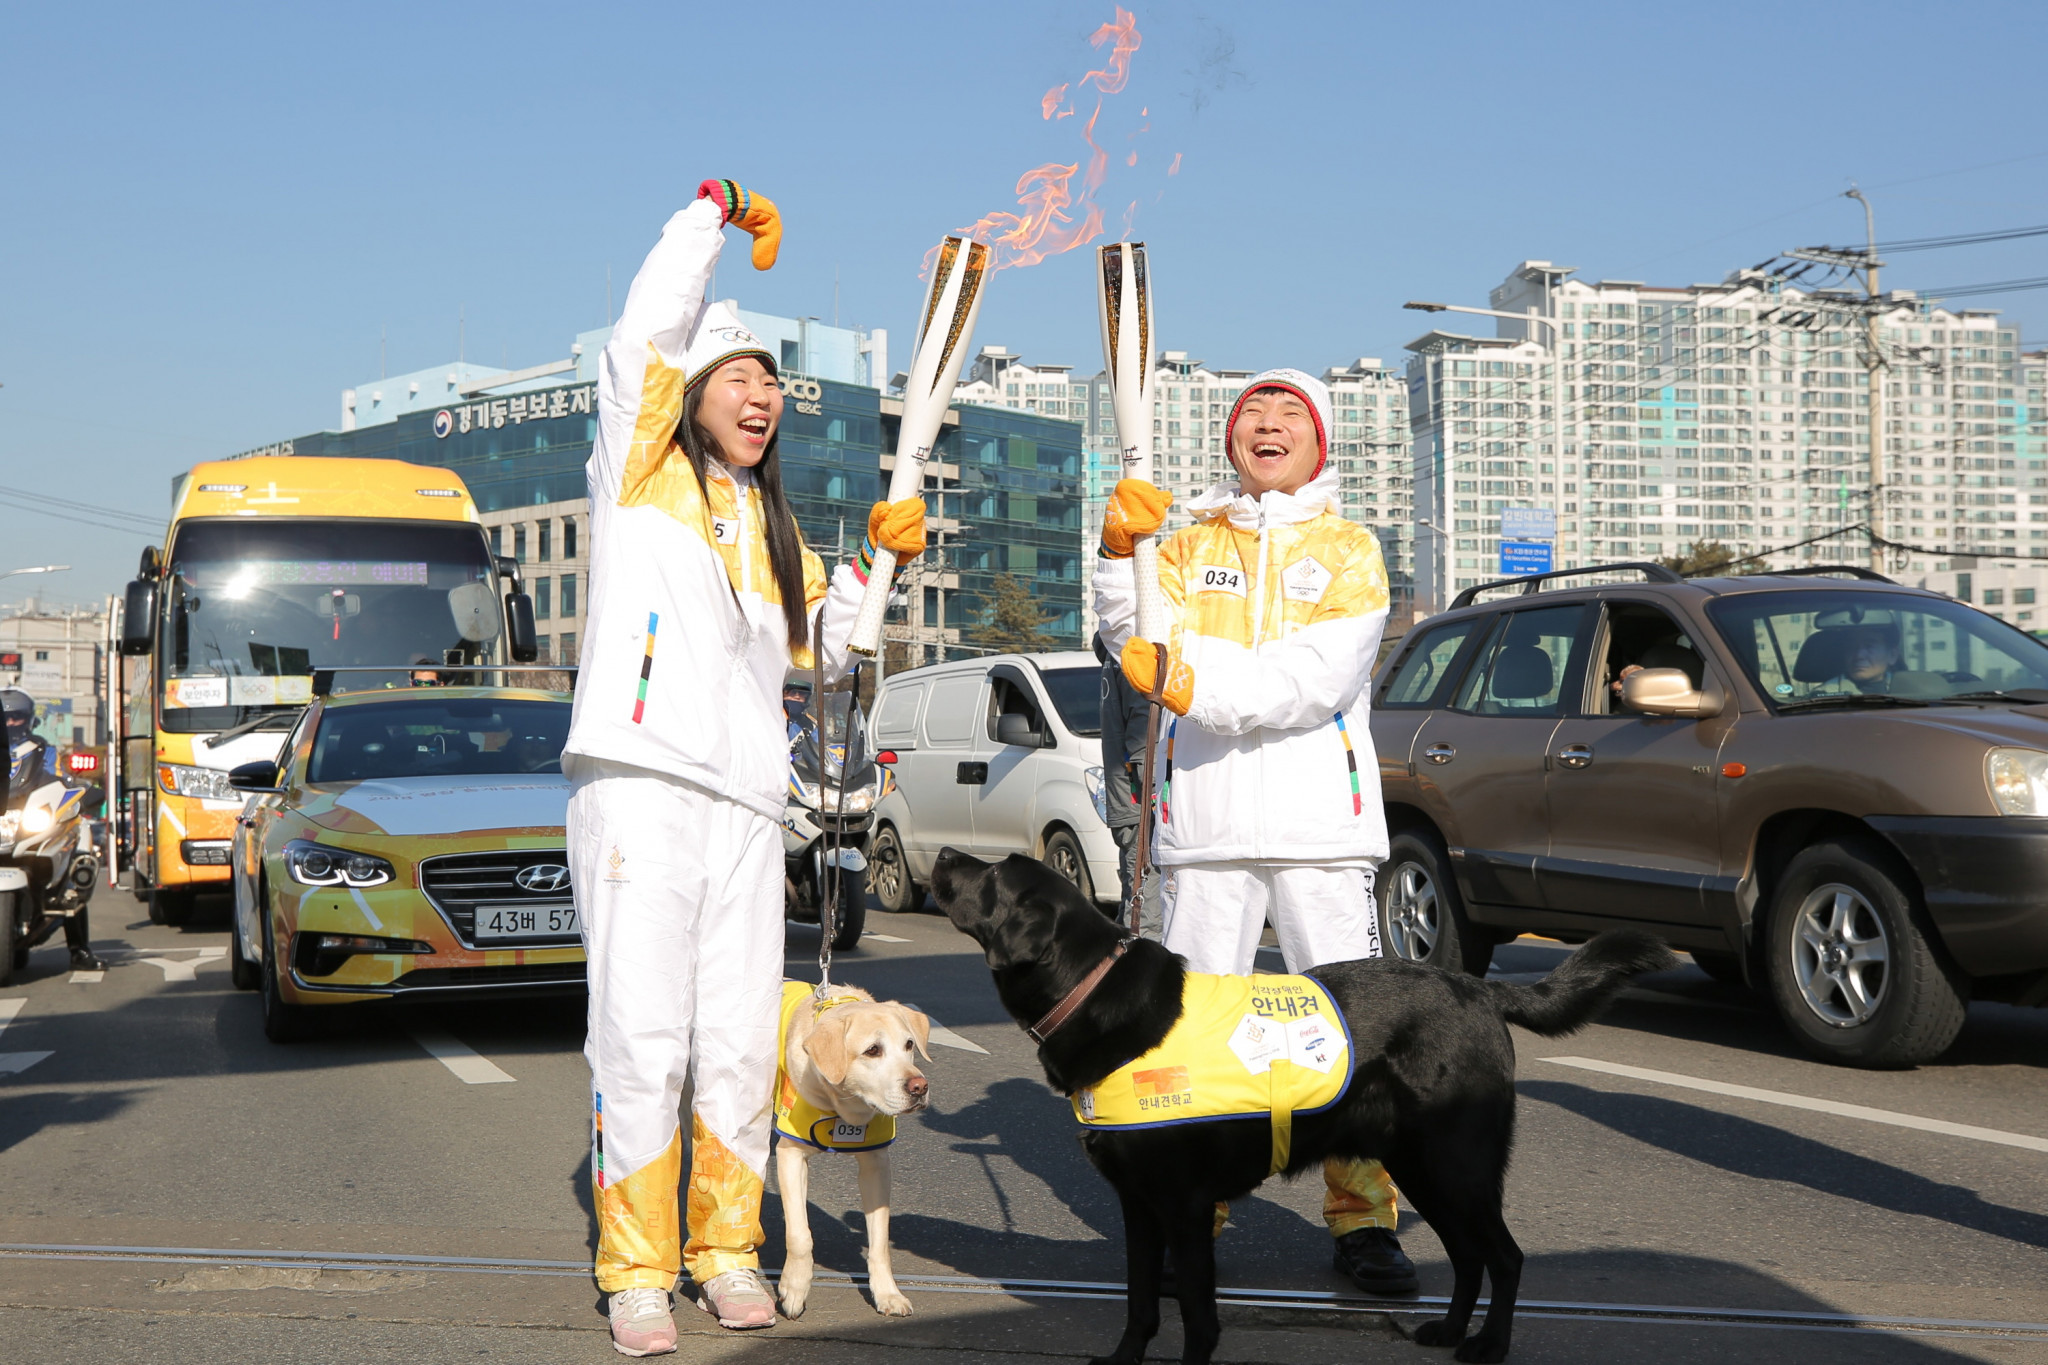 Blind runners ran with their guide dogs ©Pyeongchang 2018